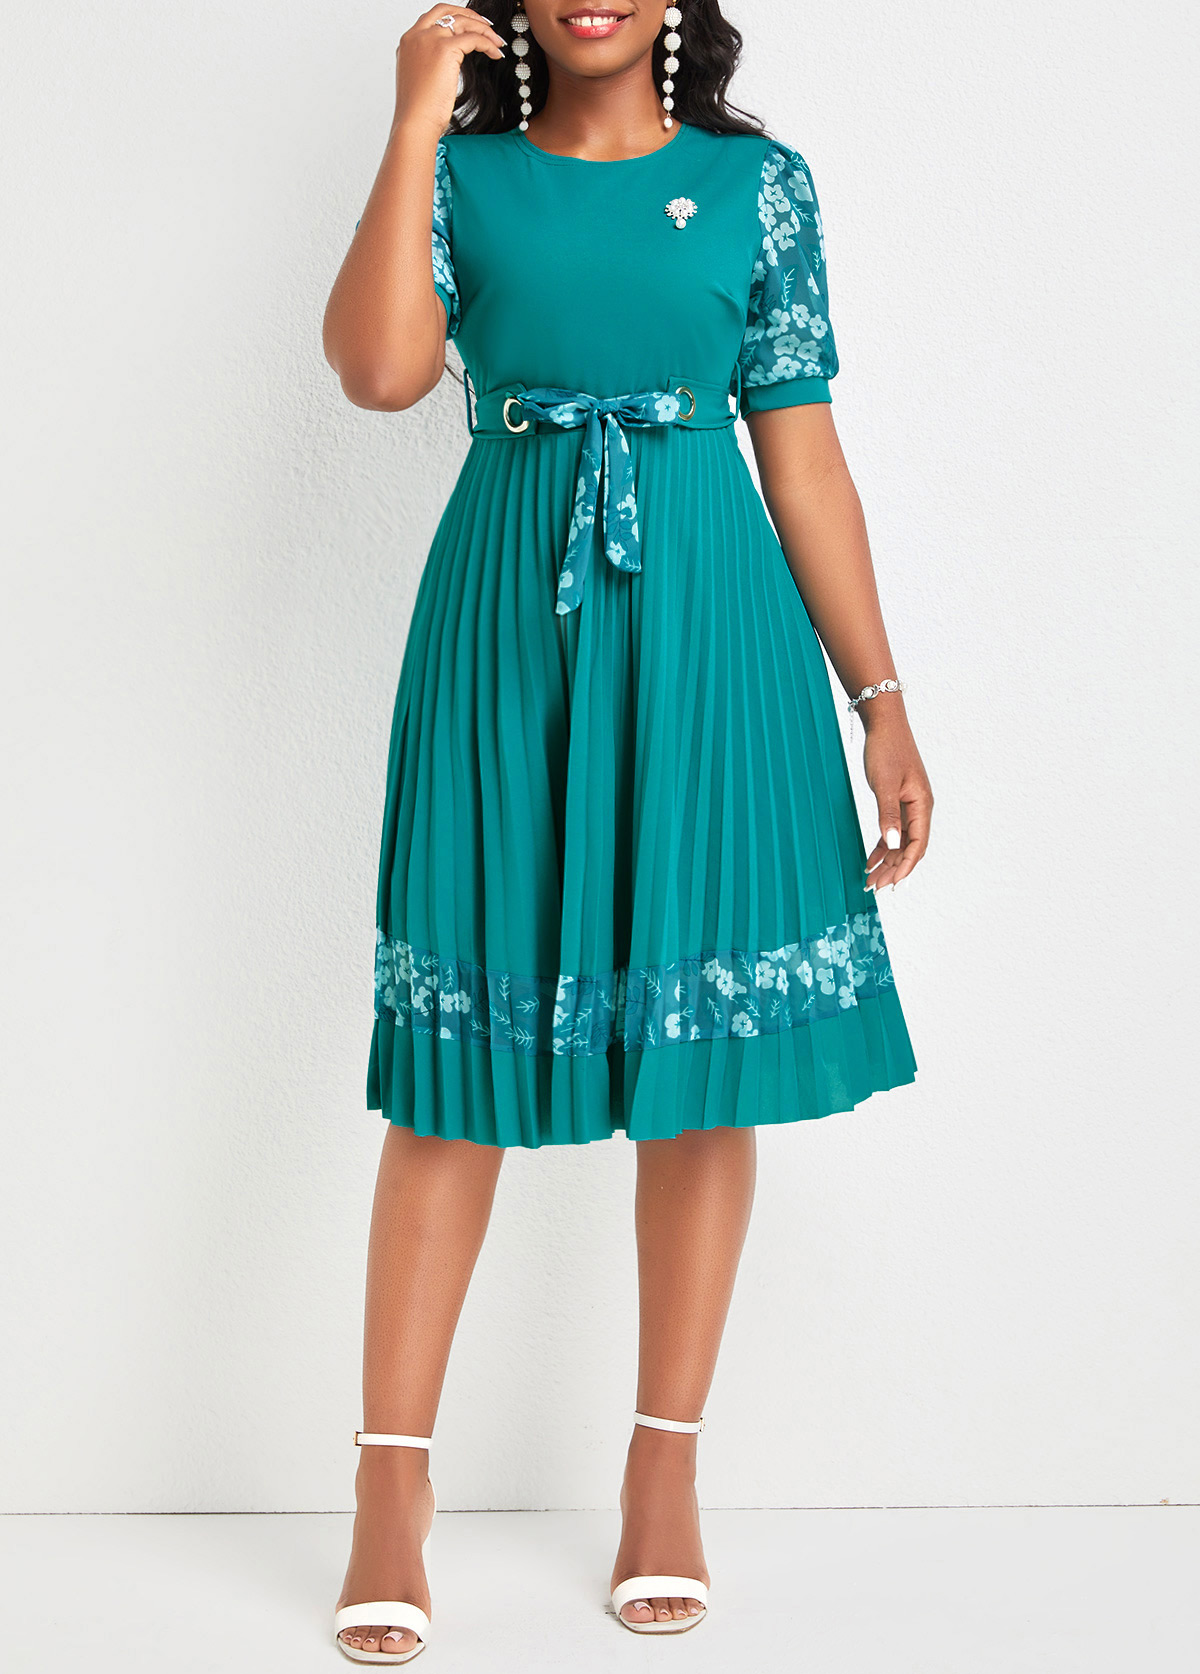 Floral Print Pleated Belted Turquoise Round Neck Dress | Rosewe.com ...